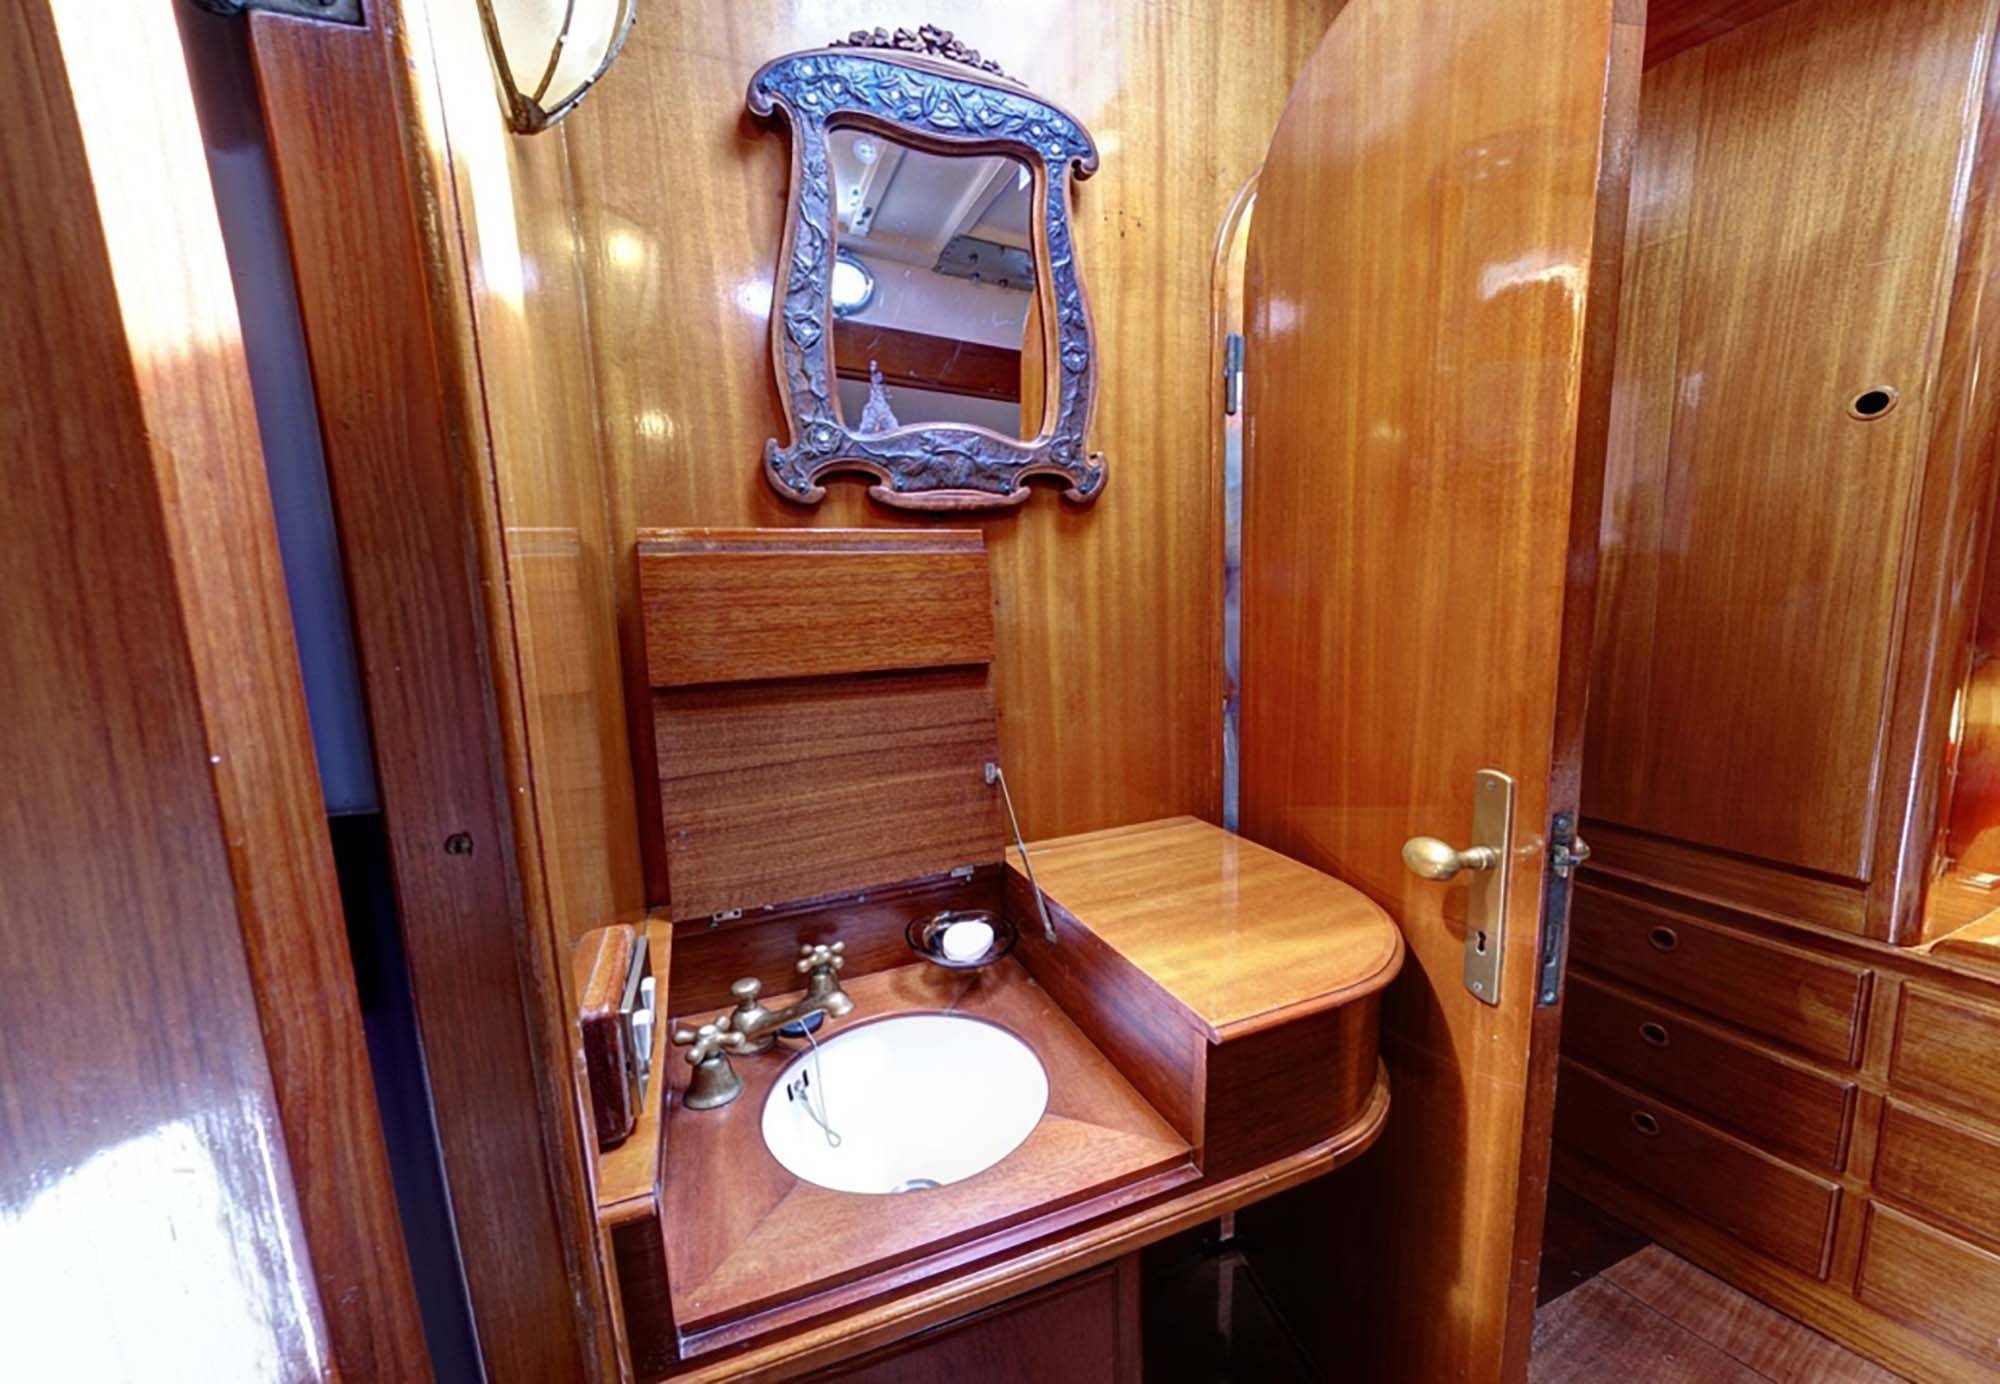 Timeless bathrooms onboard